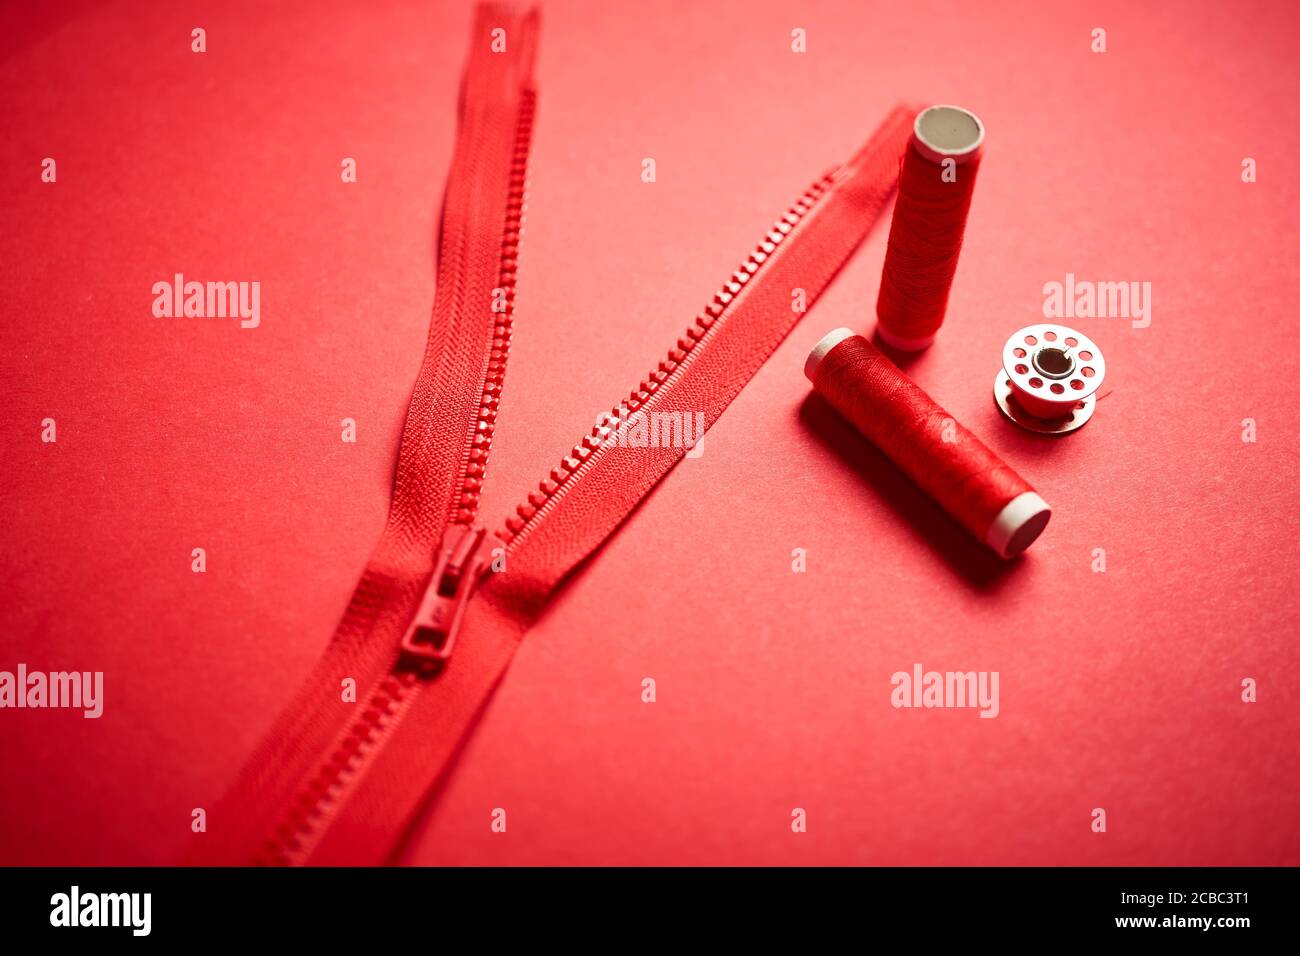 threads and zipper on a red minimalistic background Stock Photo